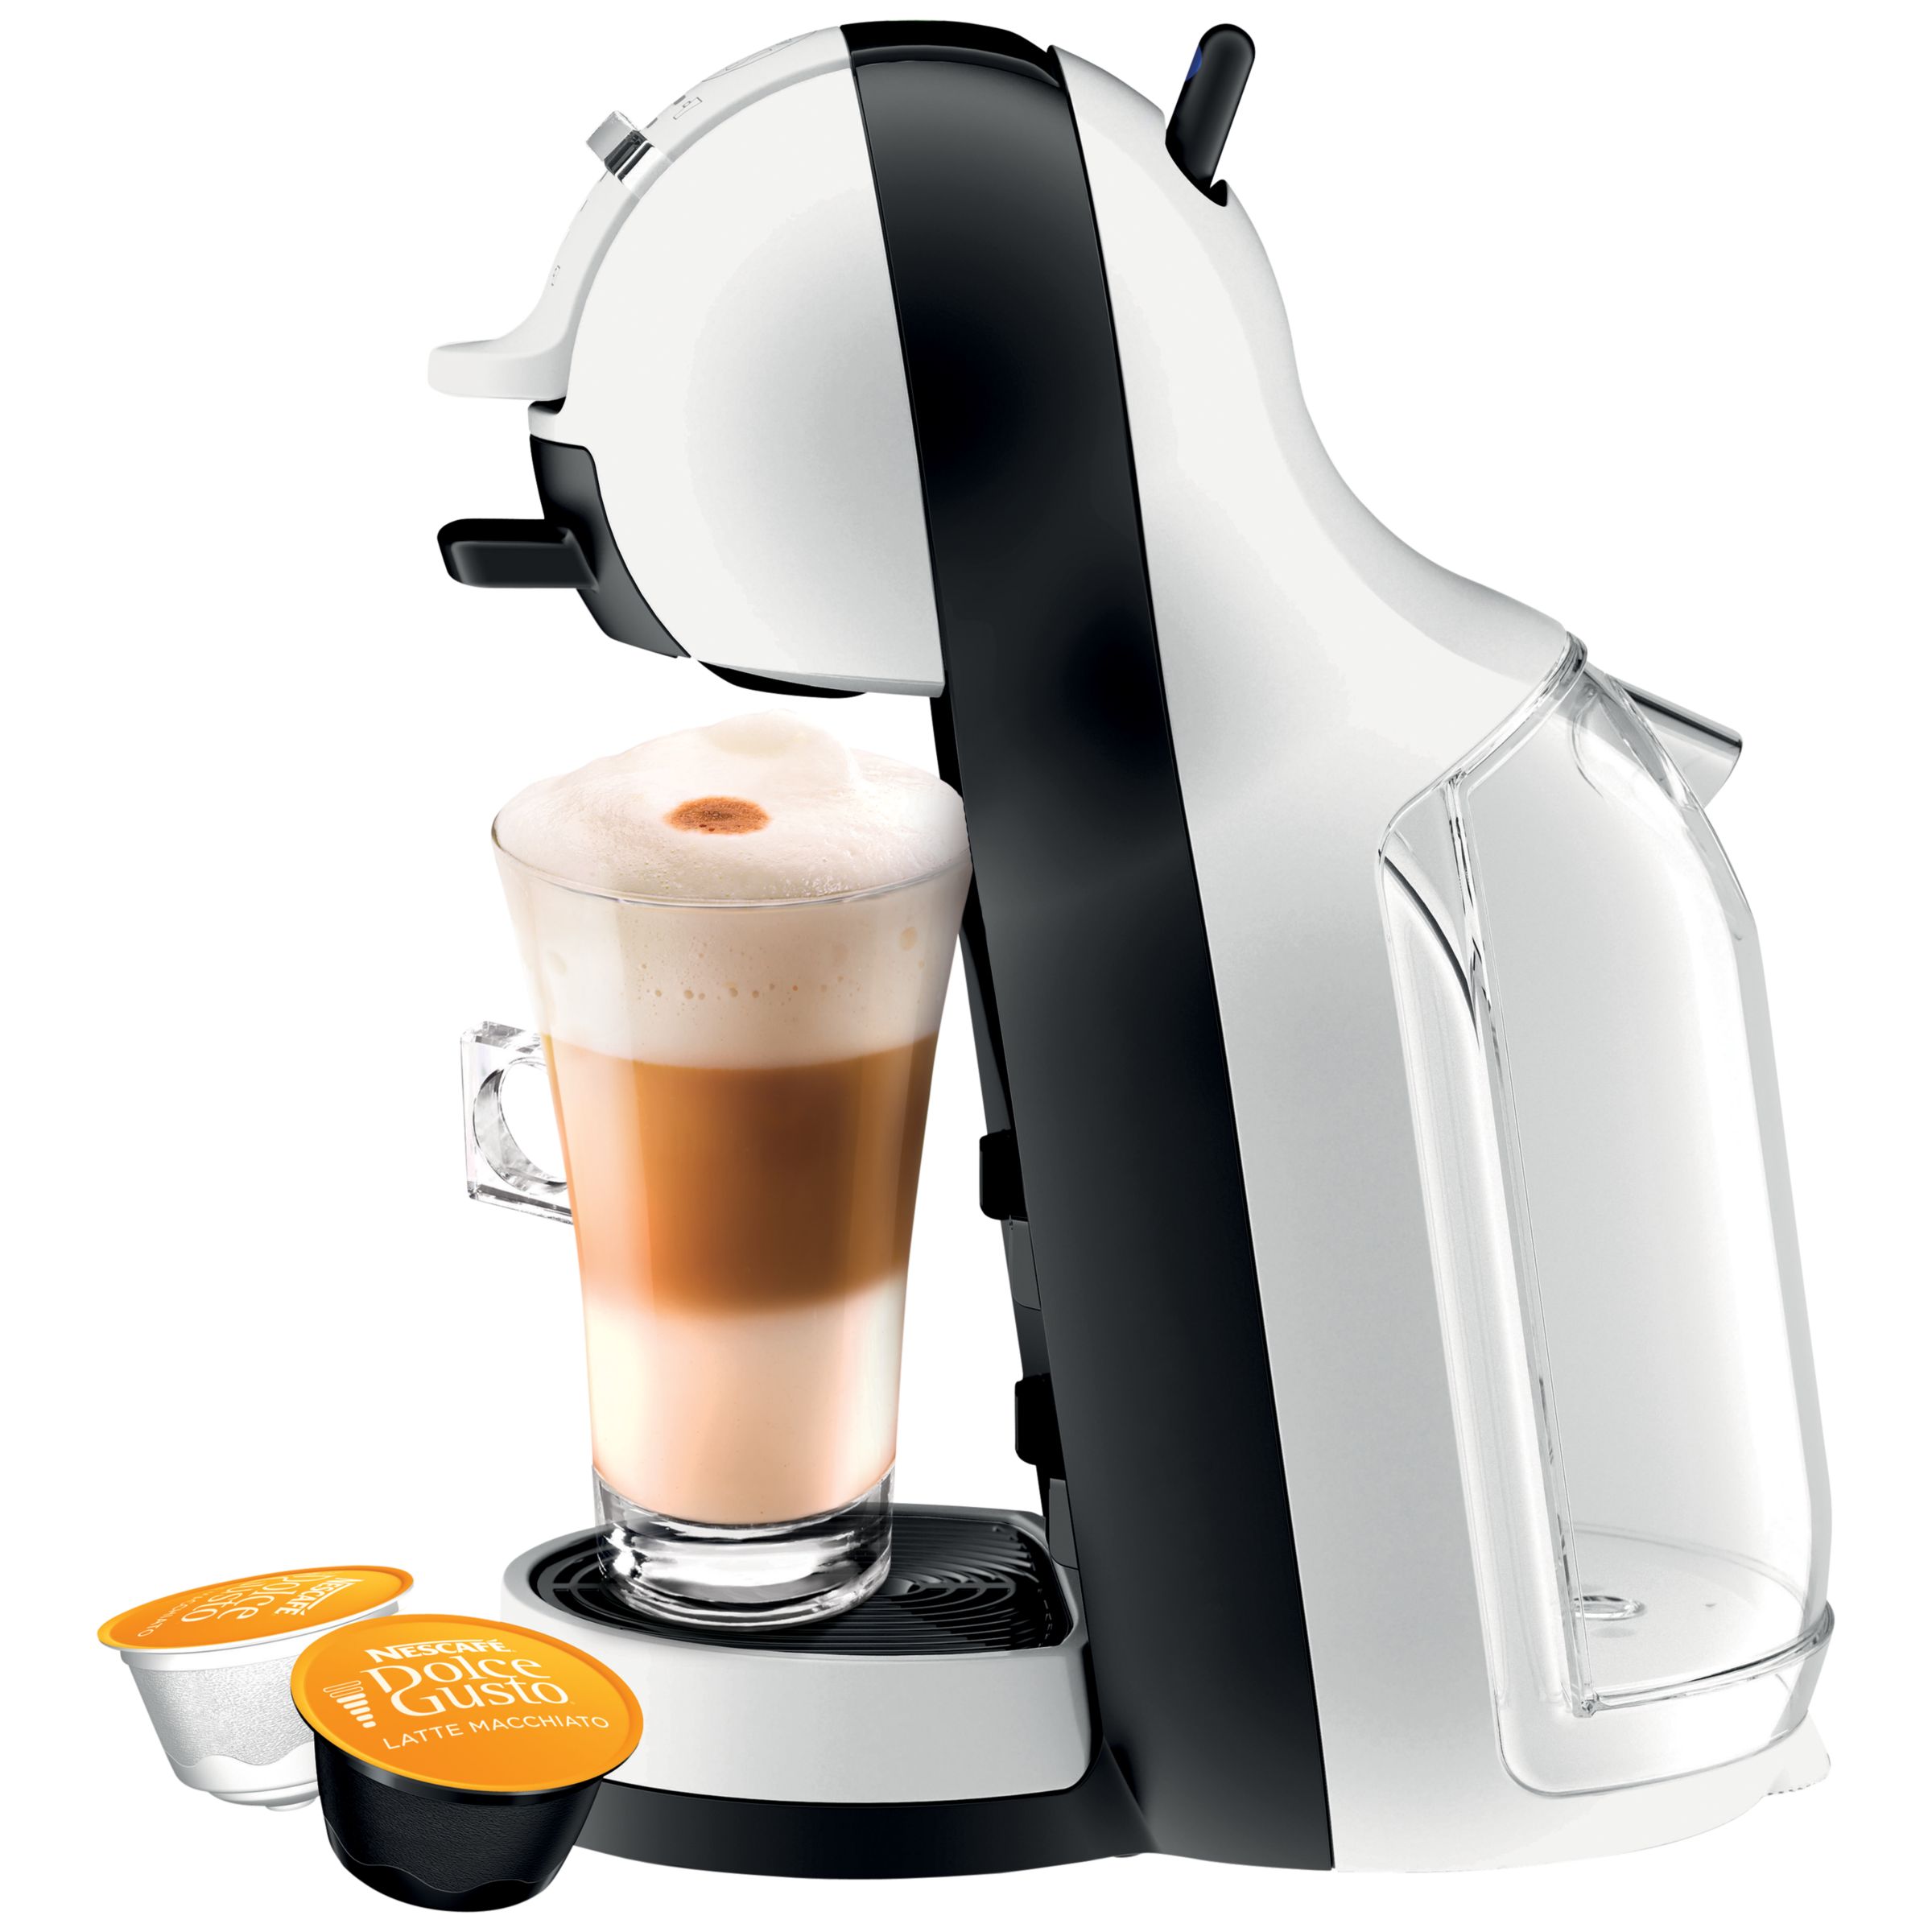 Кофемашина dolce gusto mini. Dolce gusto edg305 Mini me. Delonghi Dolce gusto edg210. Tefal кофемашина капсульная. Капсульная кофемашина Delonghi Дольче густо Нестле запчасти.